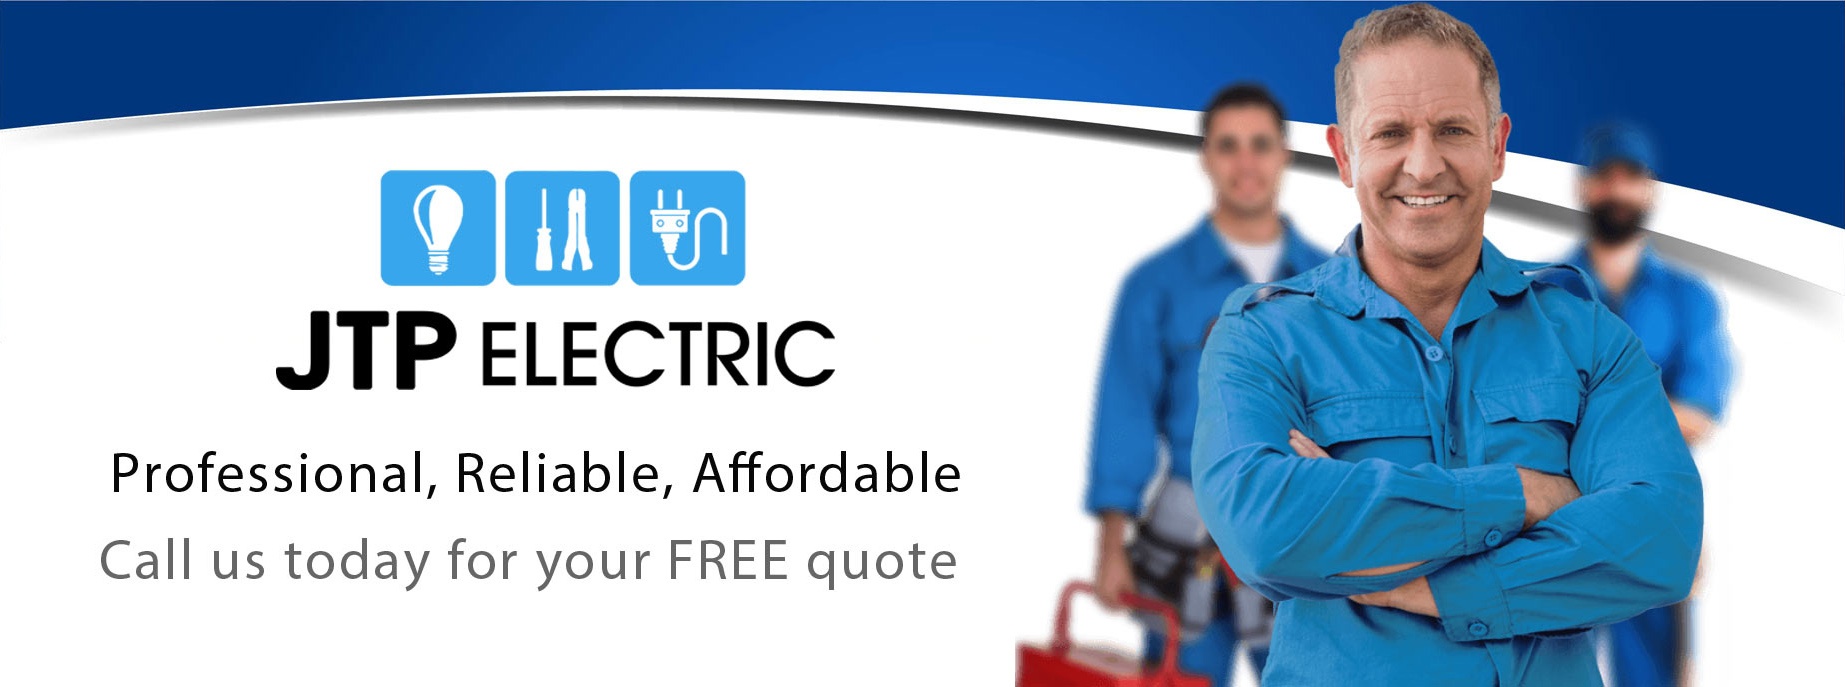 JTP Electric LLC - Professional Reliable Affordable - 773-507-2346